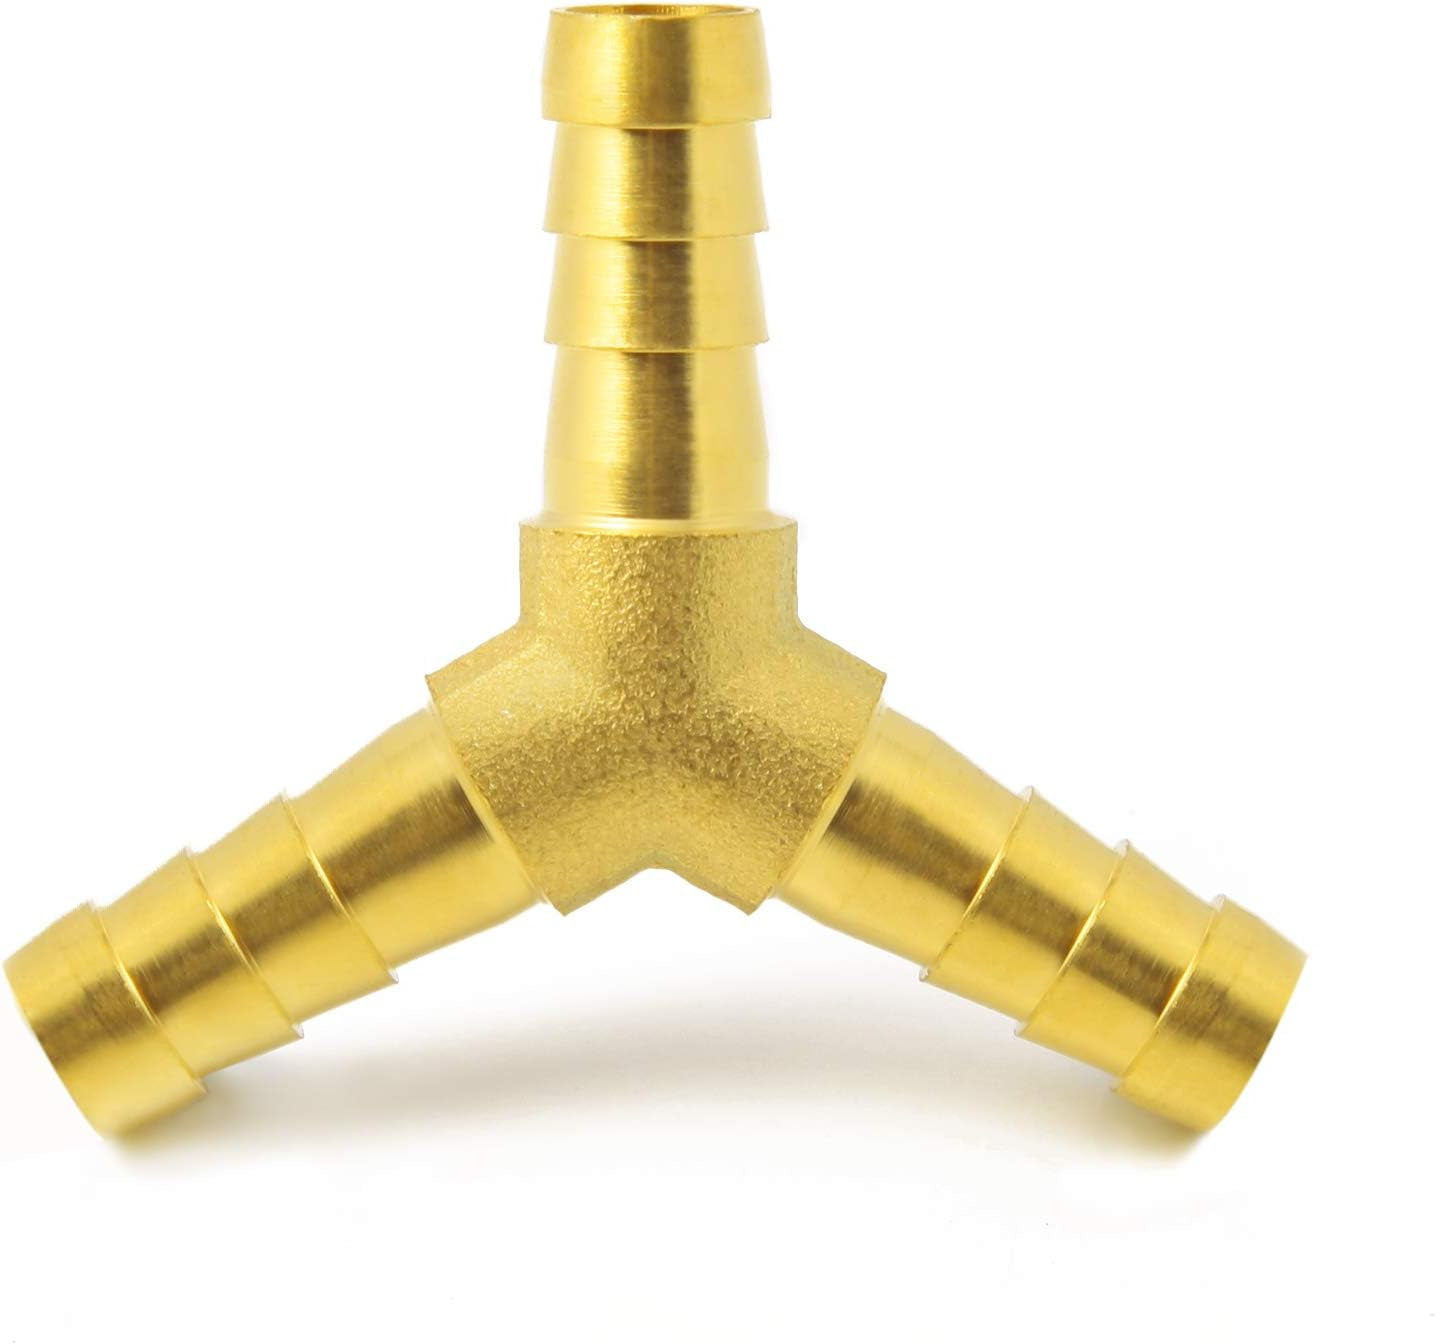 Brass 1/4" Hose Barb 3 Way Wye Y Shape Barbed Splitter Fitting Splicer for Water Fuel Air